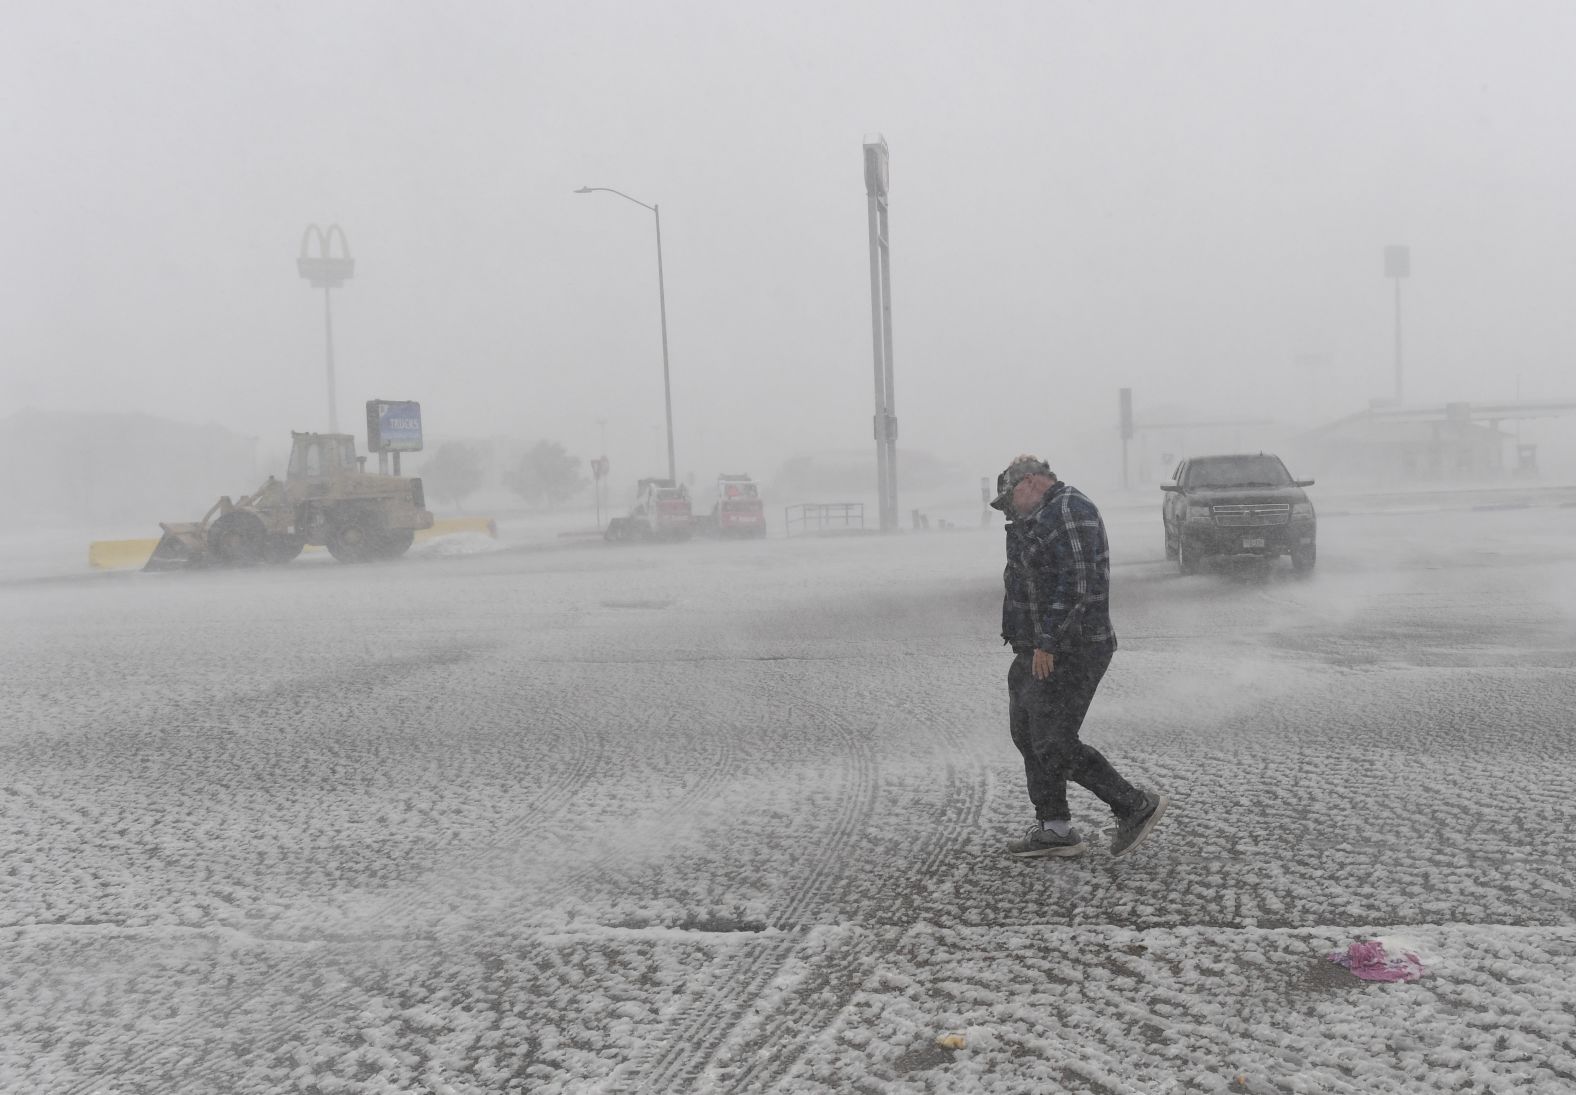 A truck driver heads back to his truck March 13 after eating at a restaurant in Limon, Colorado, where the storm stranded him.